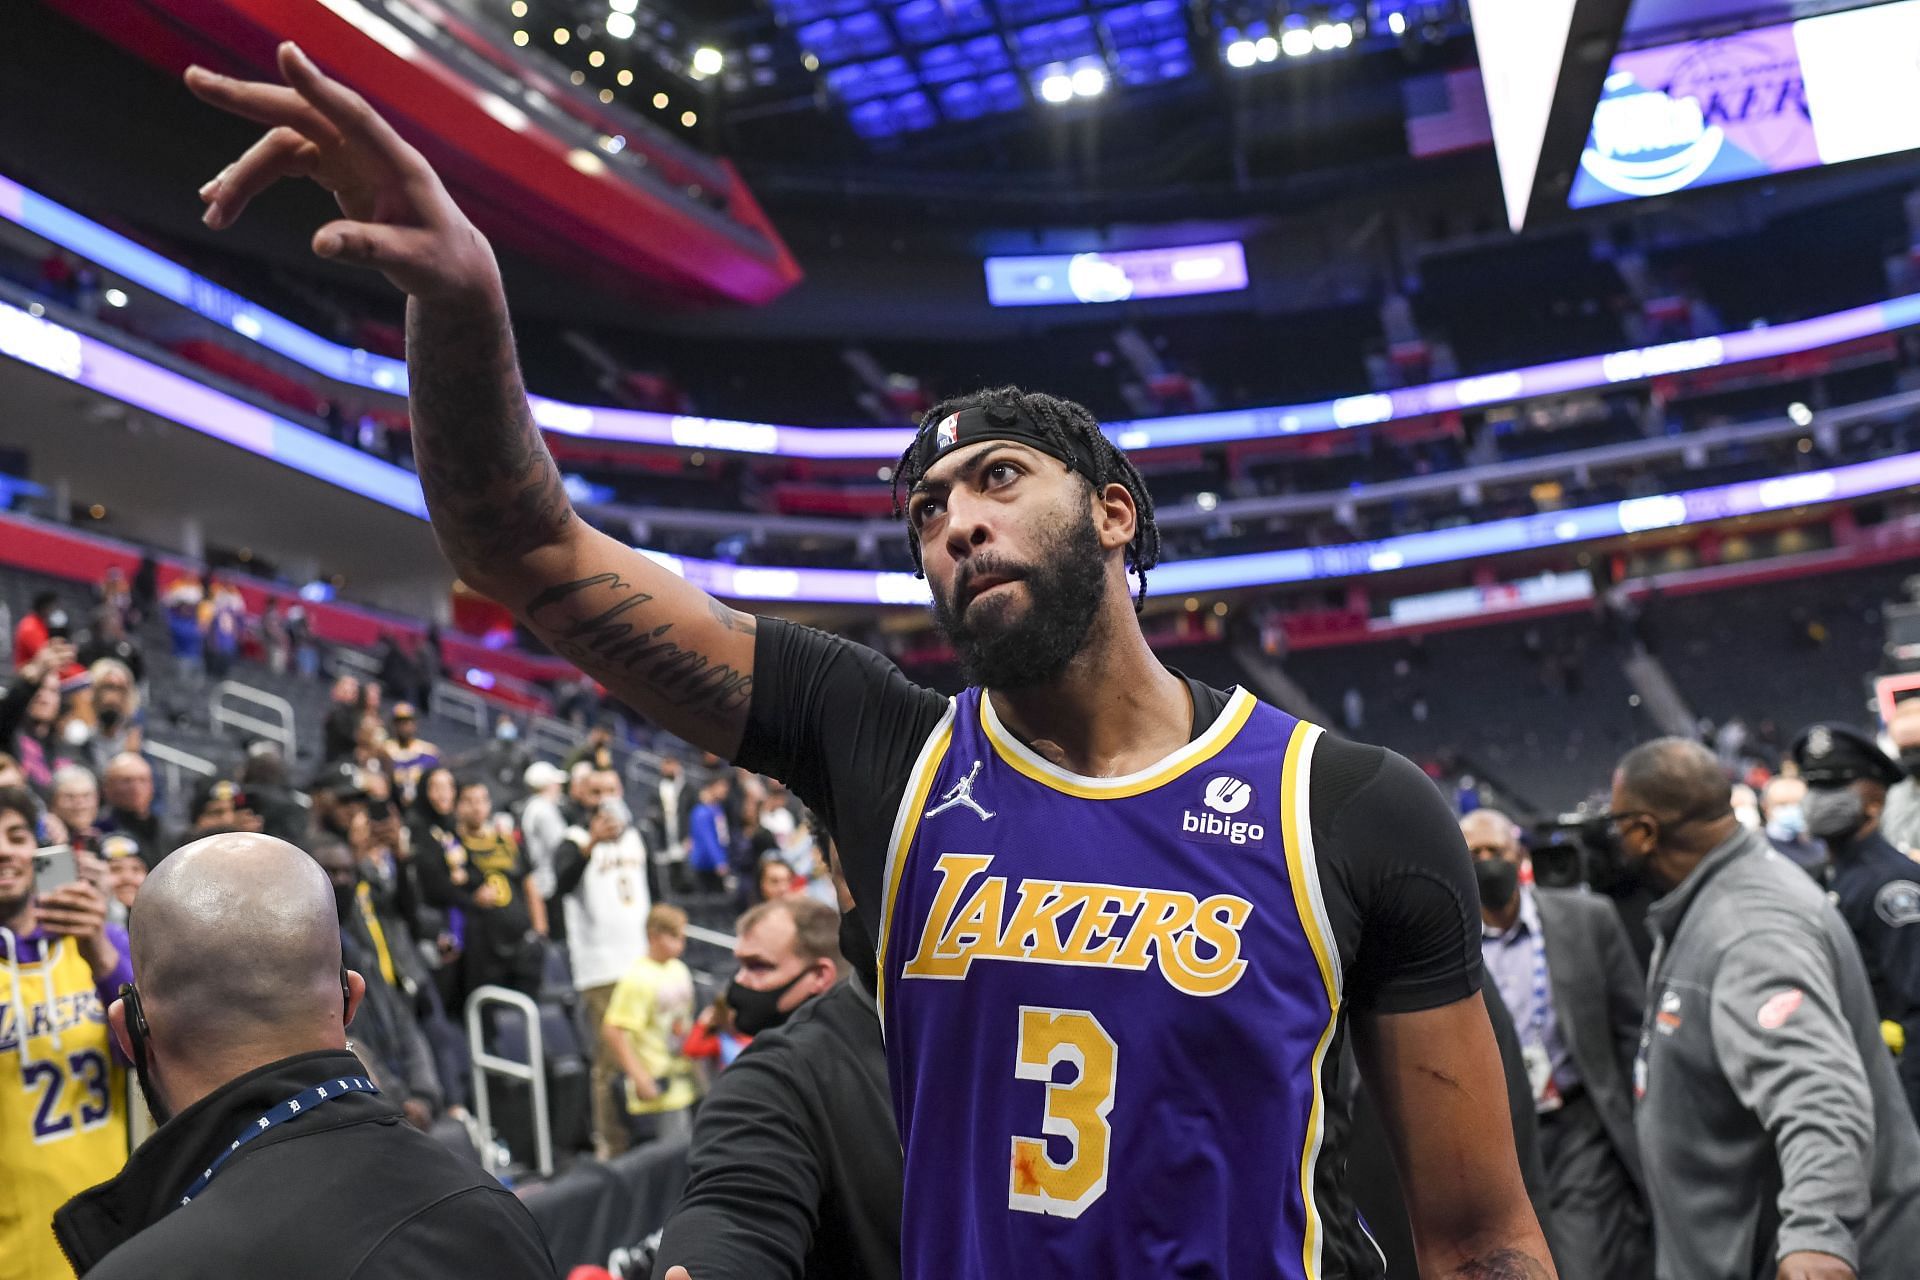 Anthony Davis of the LA Lakers leaves the court after playing the Detroit Pistons on Nov. 21 in Detroit, Michigan.